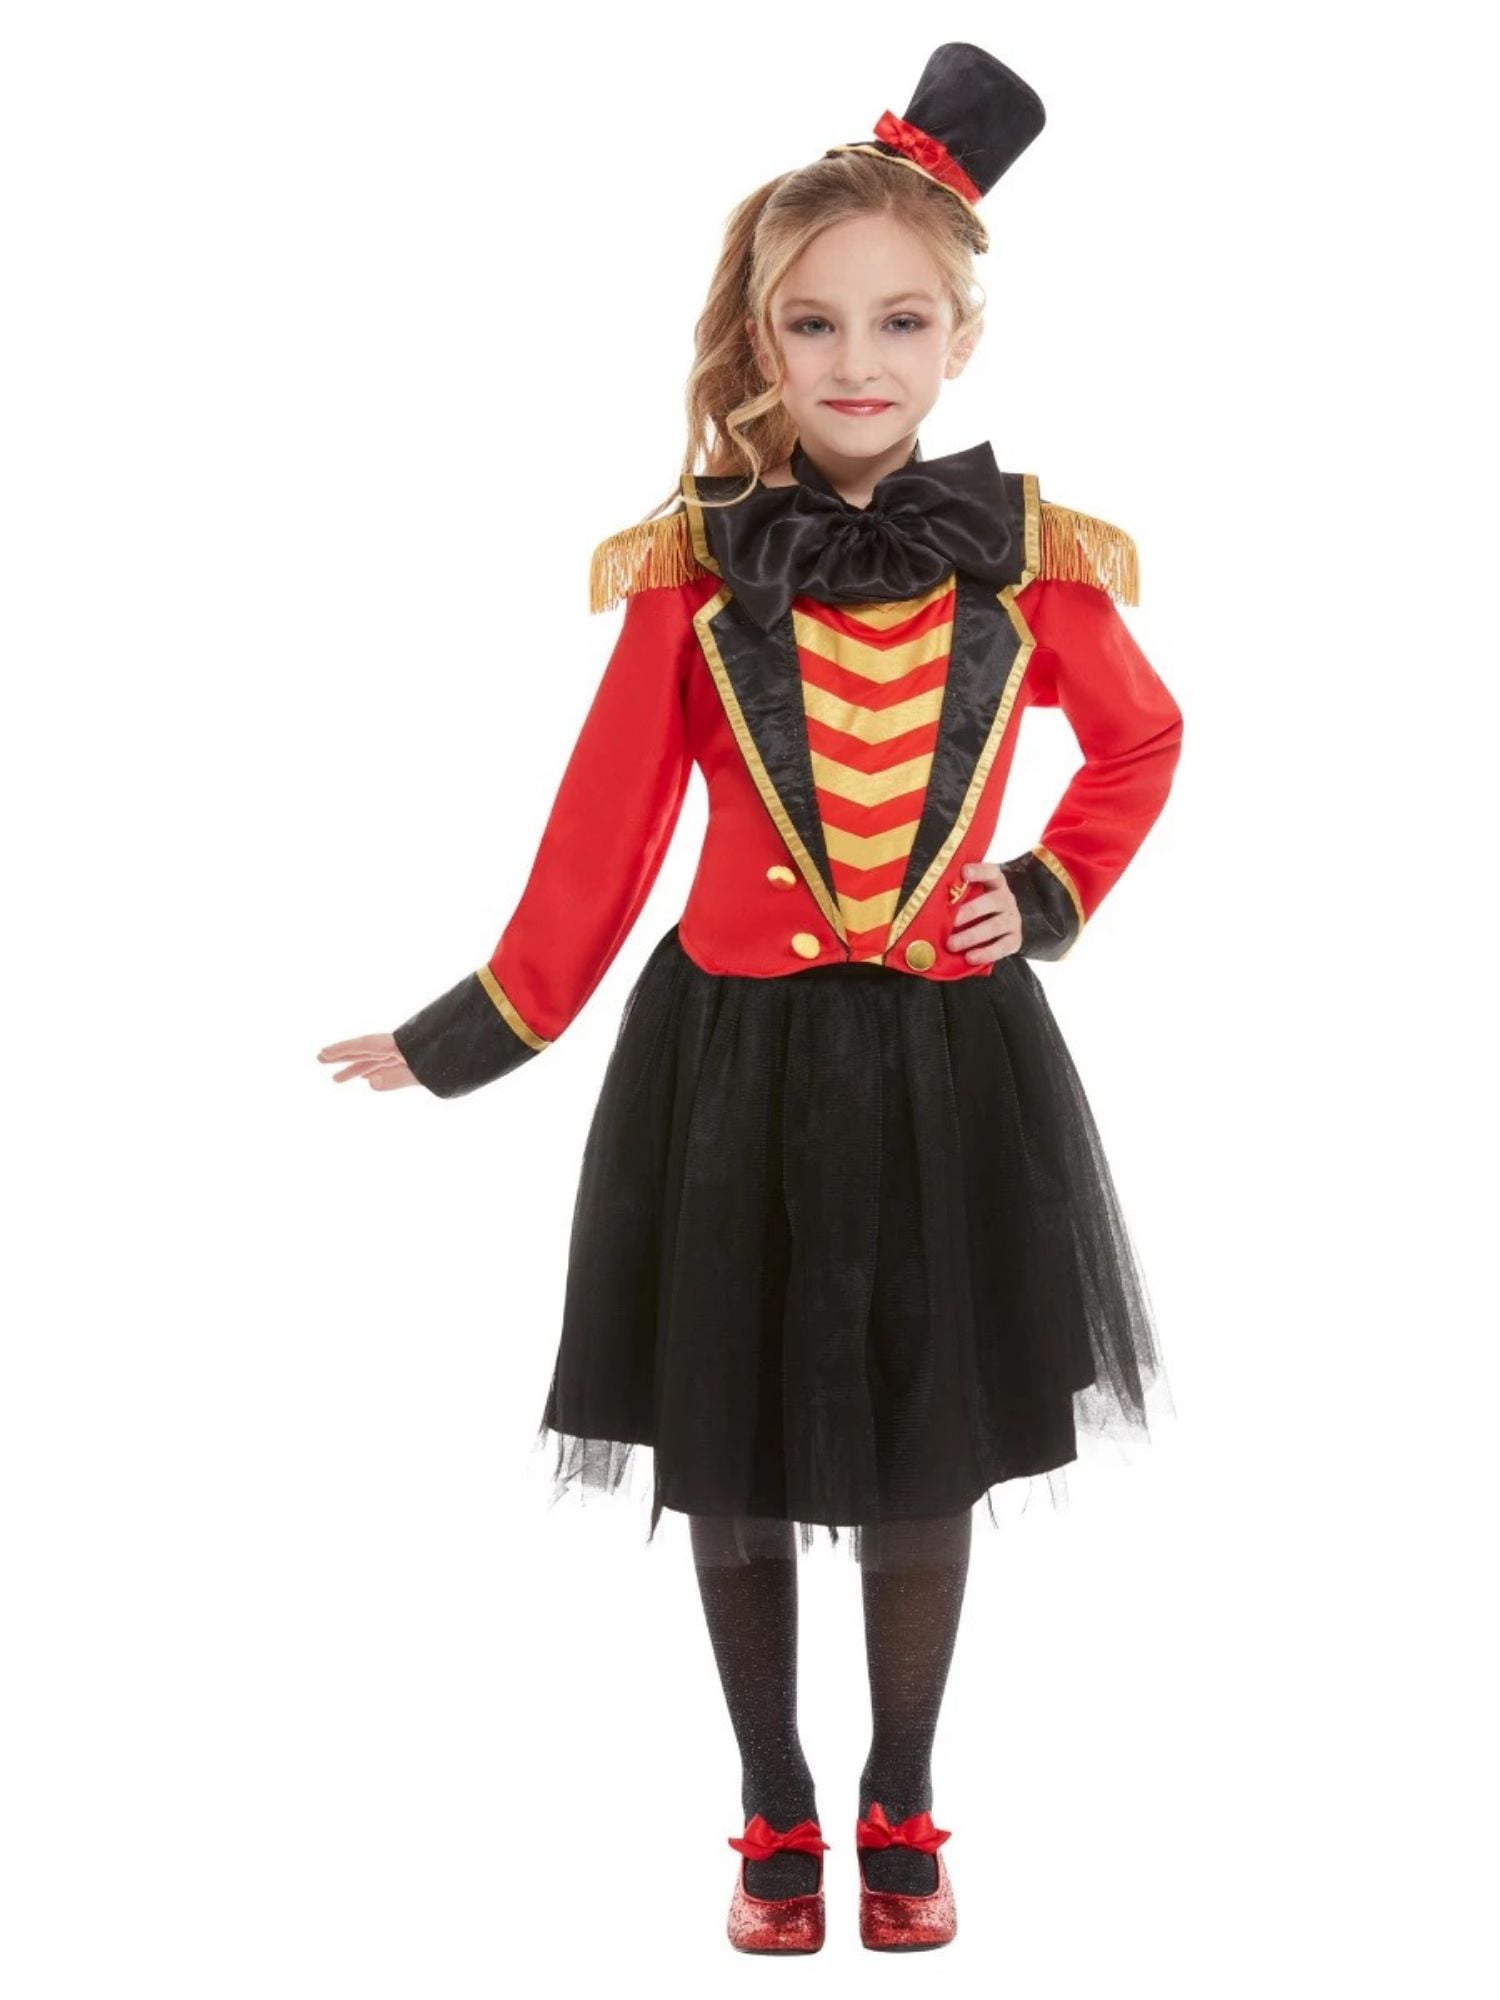 Girls The Greatest Show Ringmaster Fancy Dress Up Costume Kids Cosplay Party Set